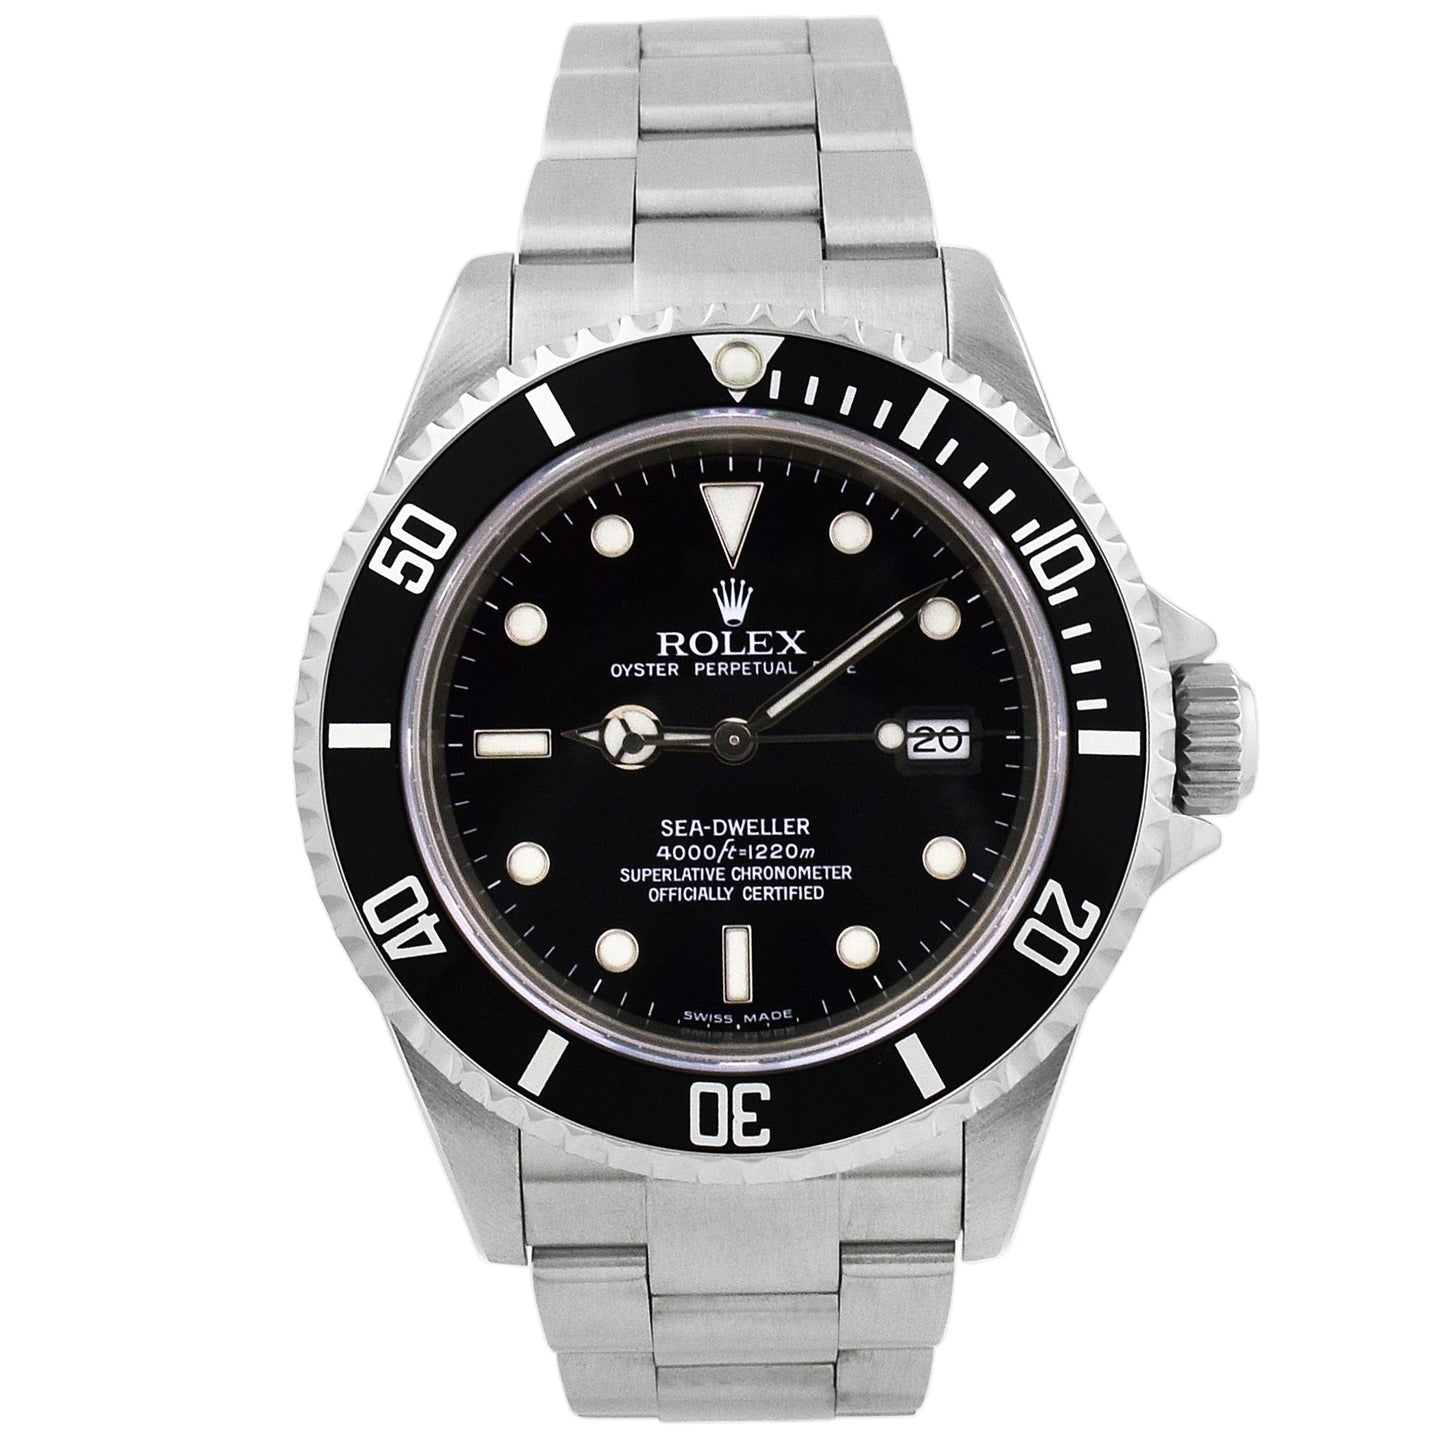 Rolex Sea-Dweller 4000 Stainless Steel 40mm Black Stick Dial Watch Reference# 16600